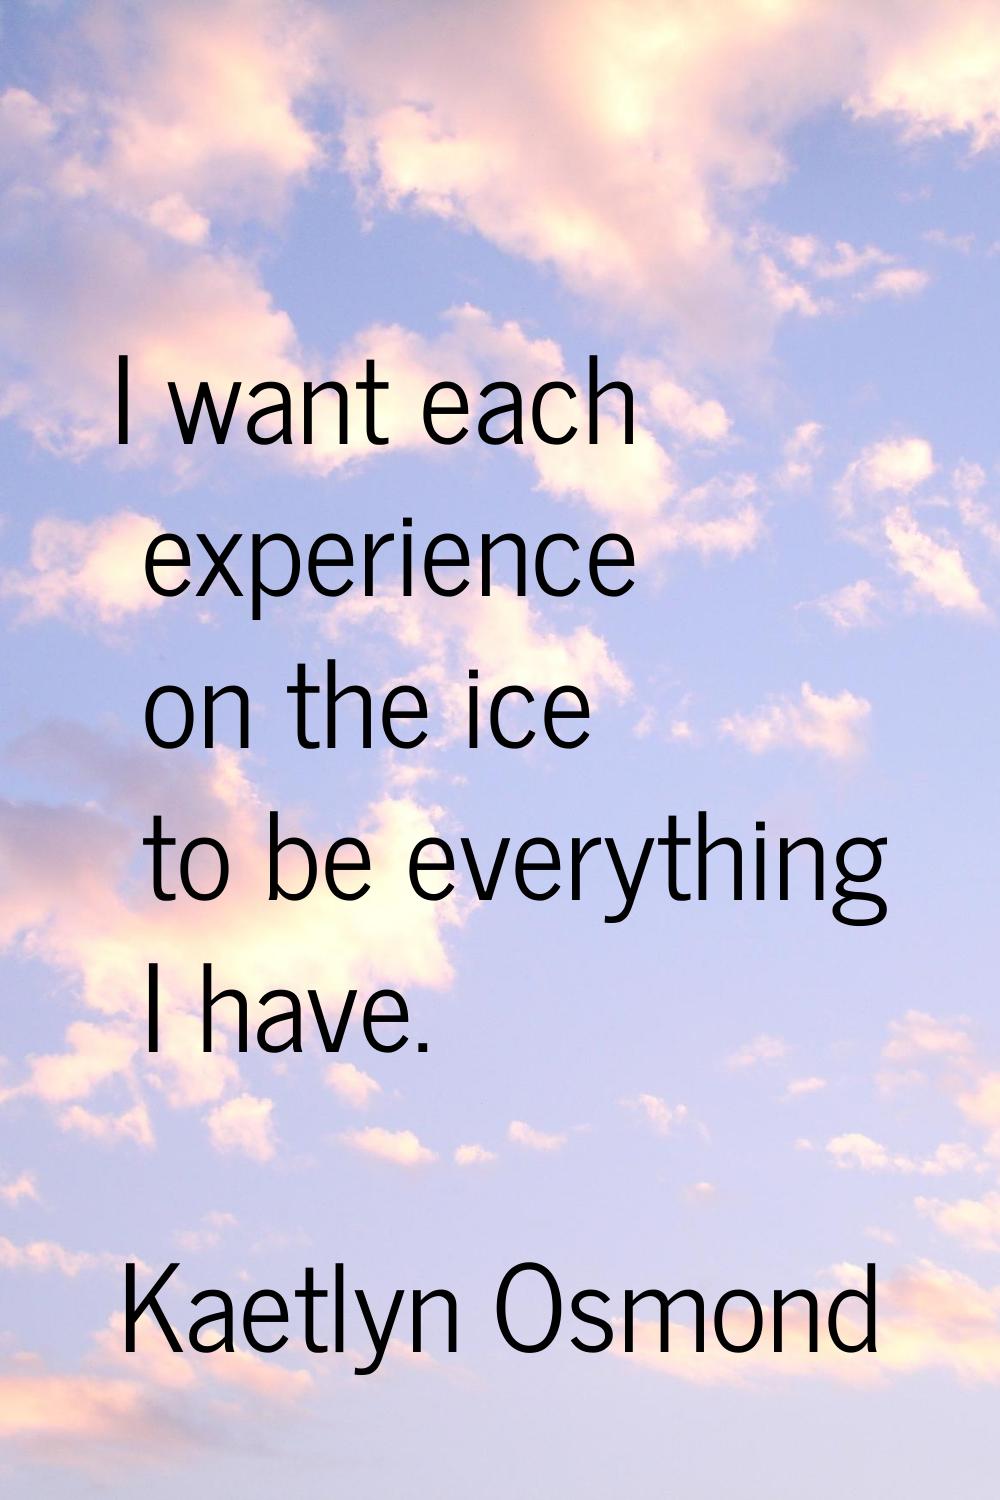 I want each experience on the ice to be everything I have.